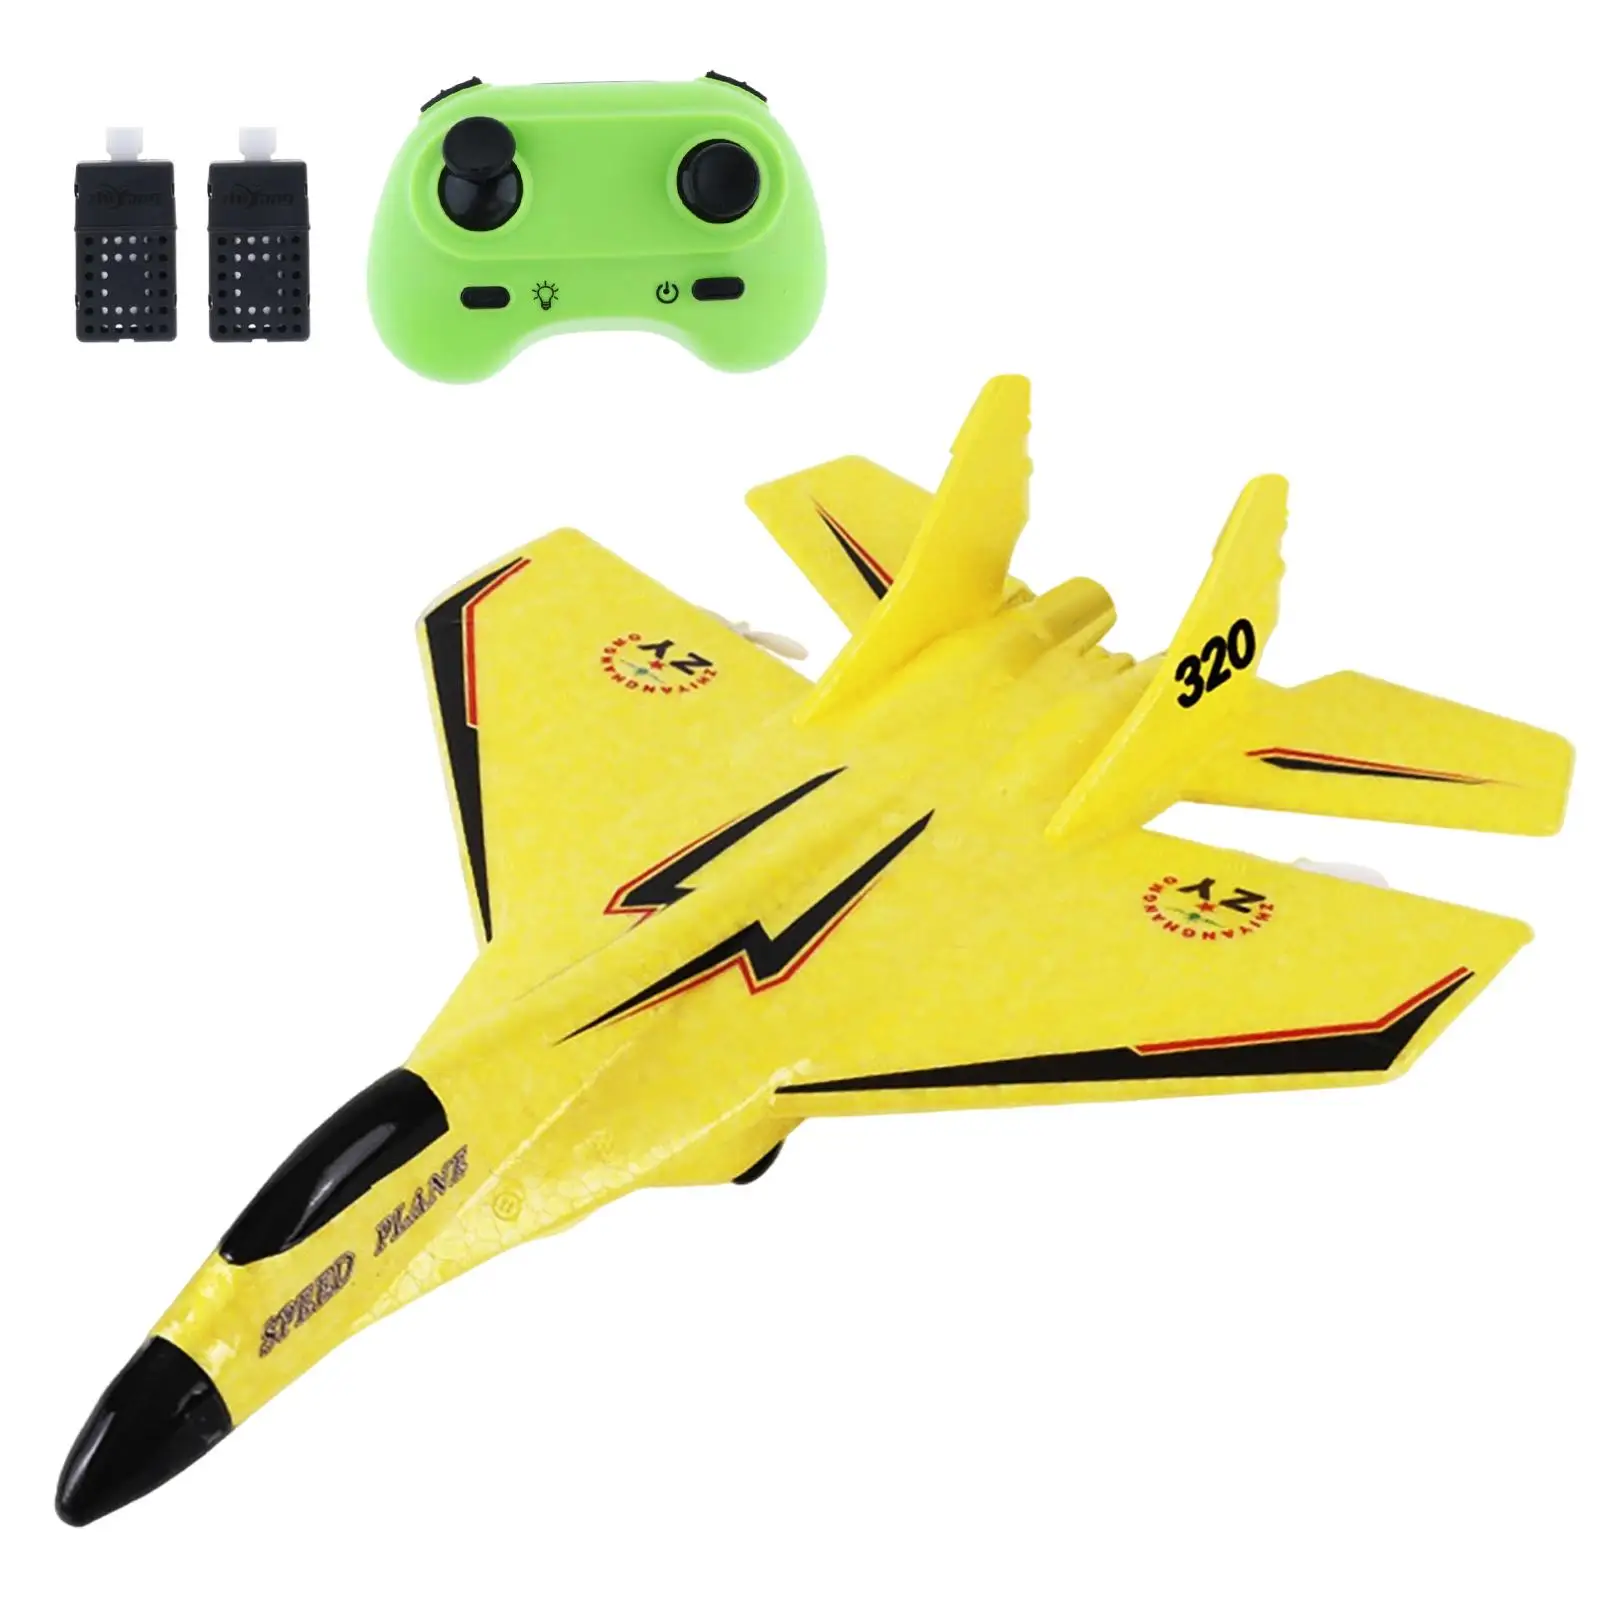 2 CH RC Plane Ready to Fly Gift Easy to Fly Outdoor Flighting Toys Portable Foam RC Airplane RC Glider for Adults Beginner Kids